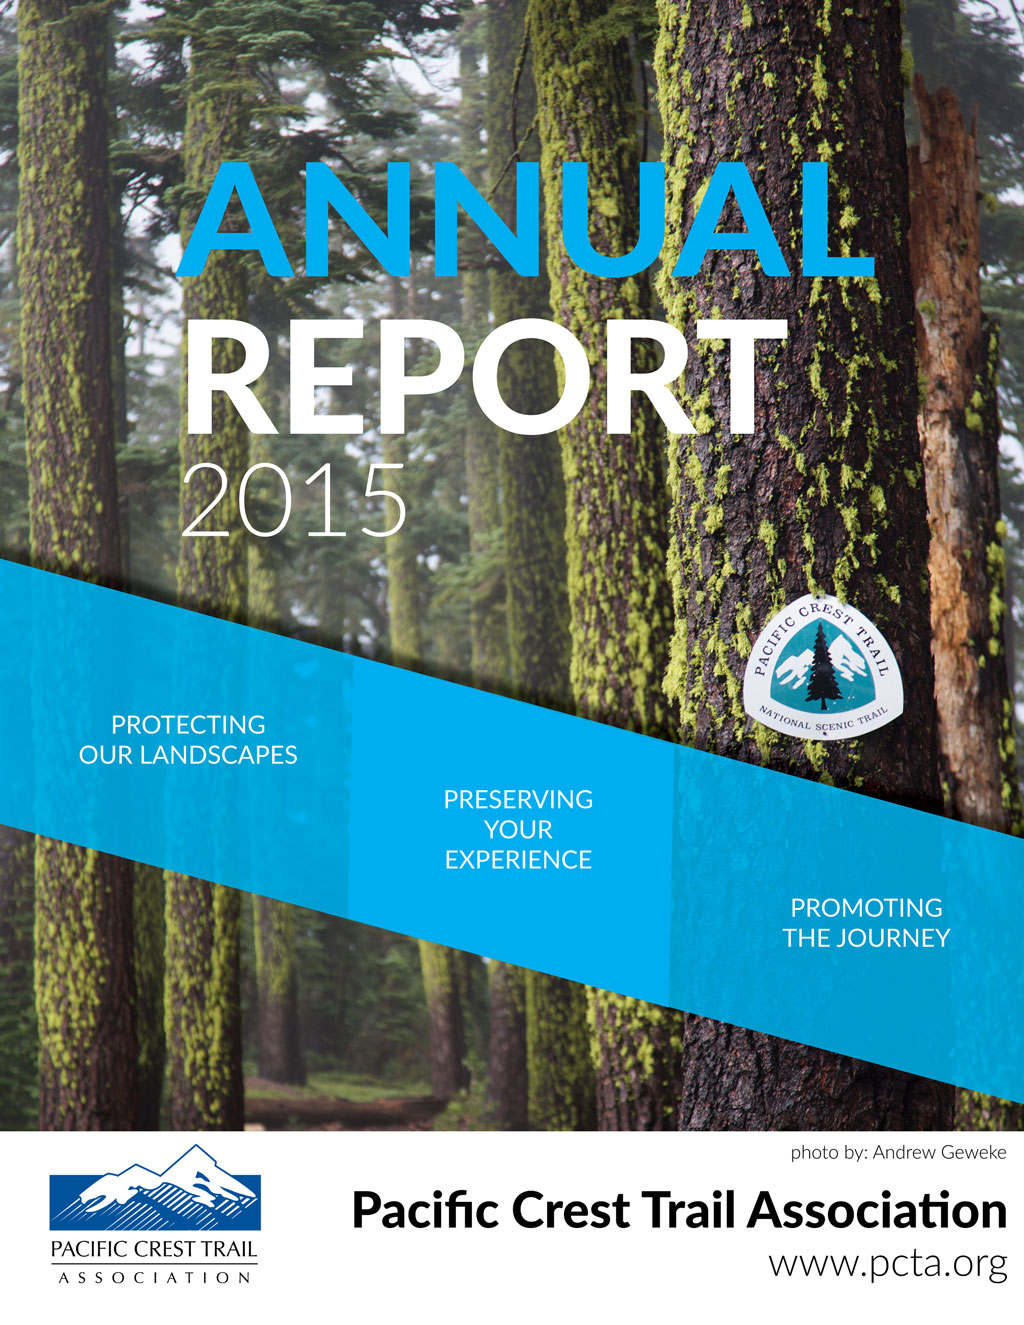 Click the image or this link to download the 2015 PCTA Annual Report.